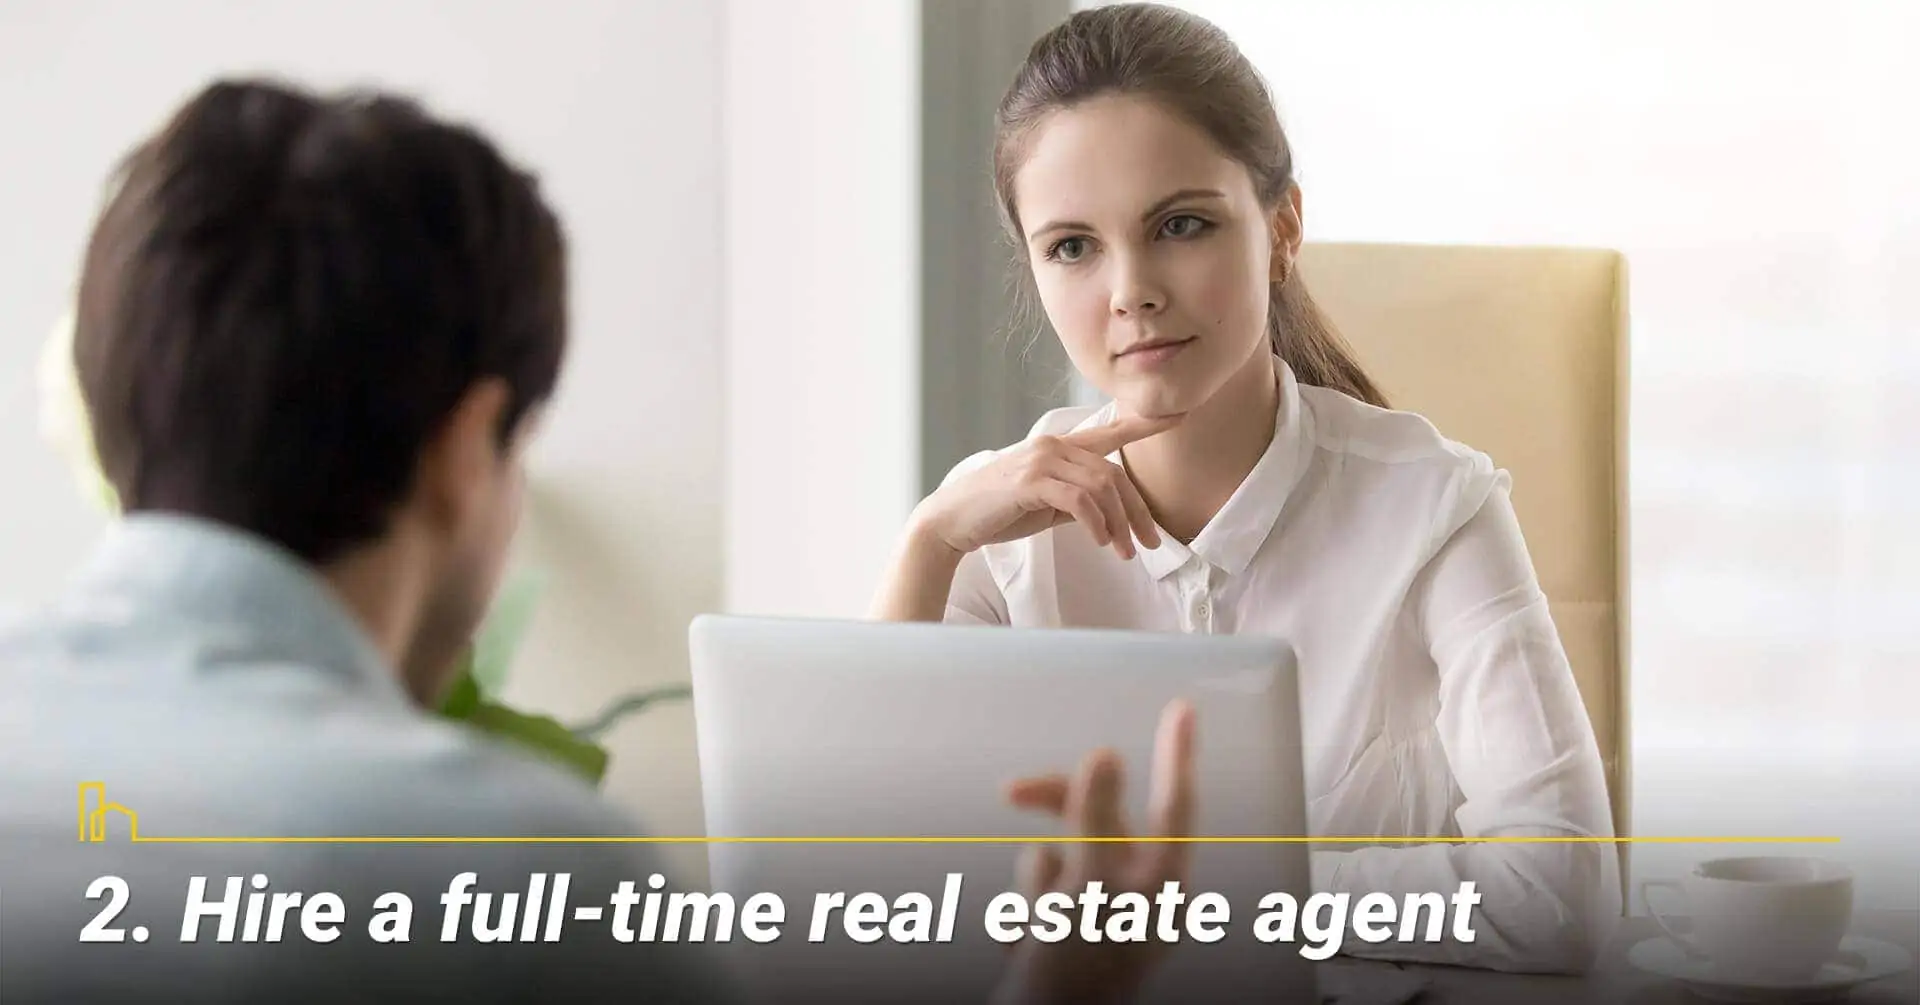 Hire a full-time real estate agent, work with a full-time professional agent